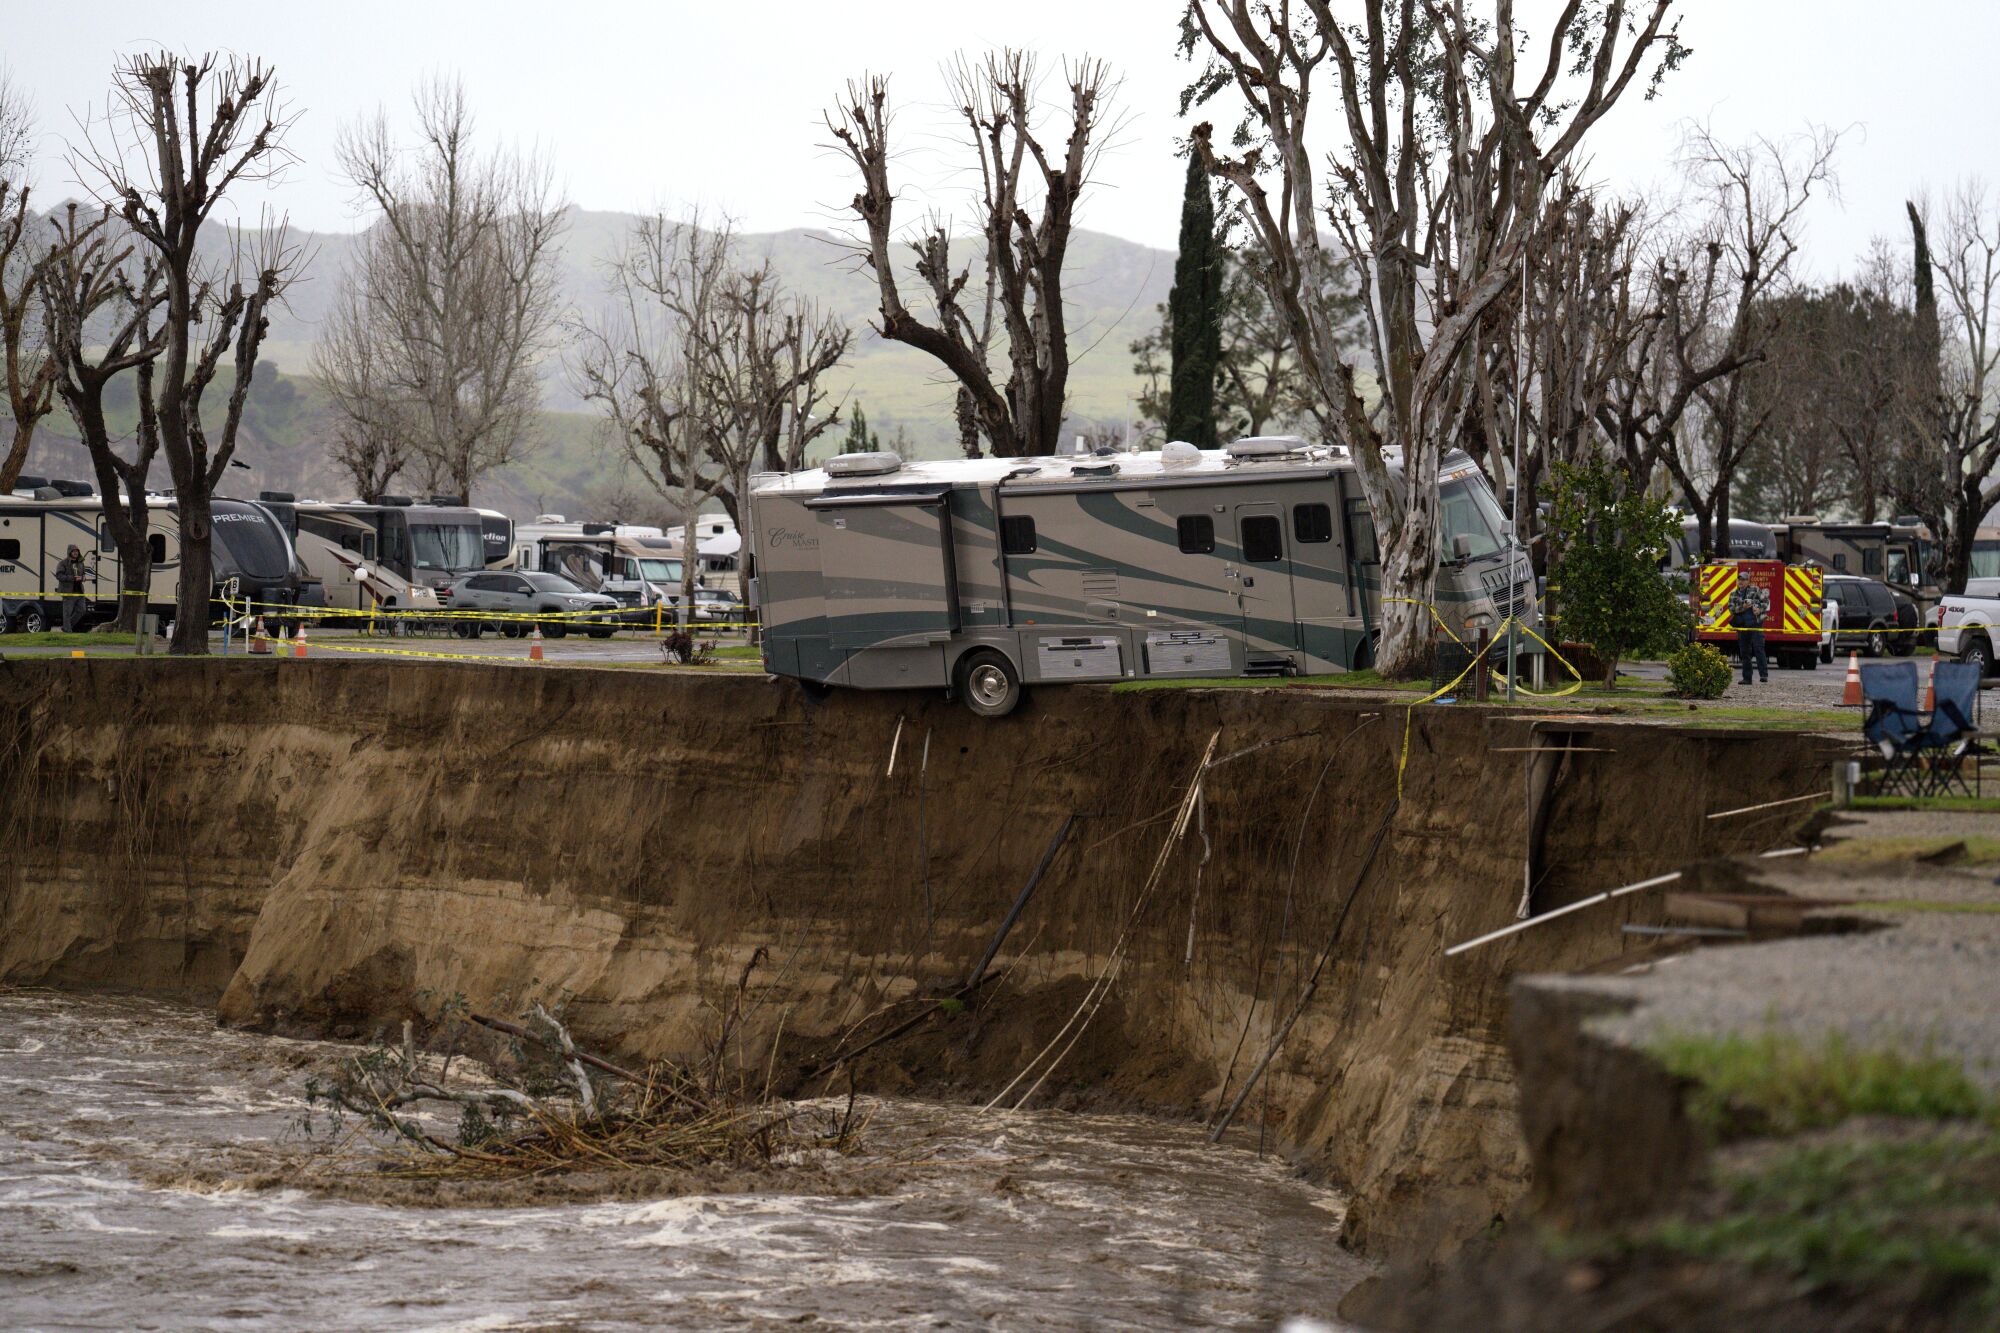 An RV on the edge of an eroded riverbank at the Valencia Travel Village RV Park in Castaic.